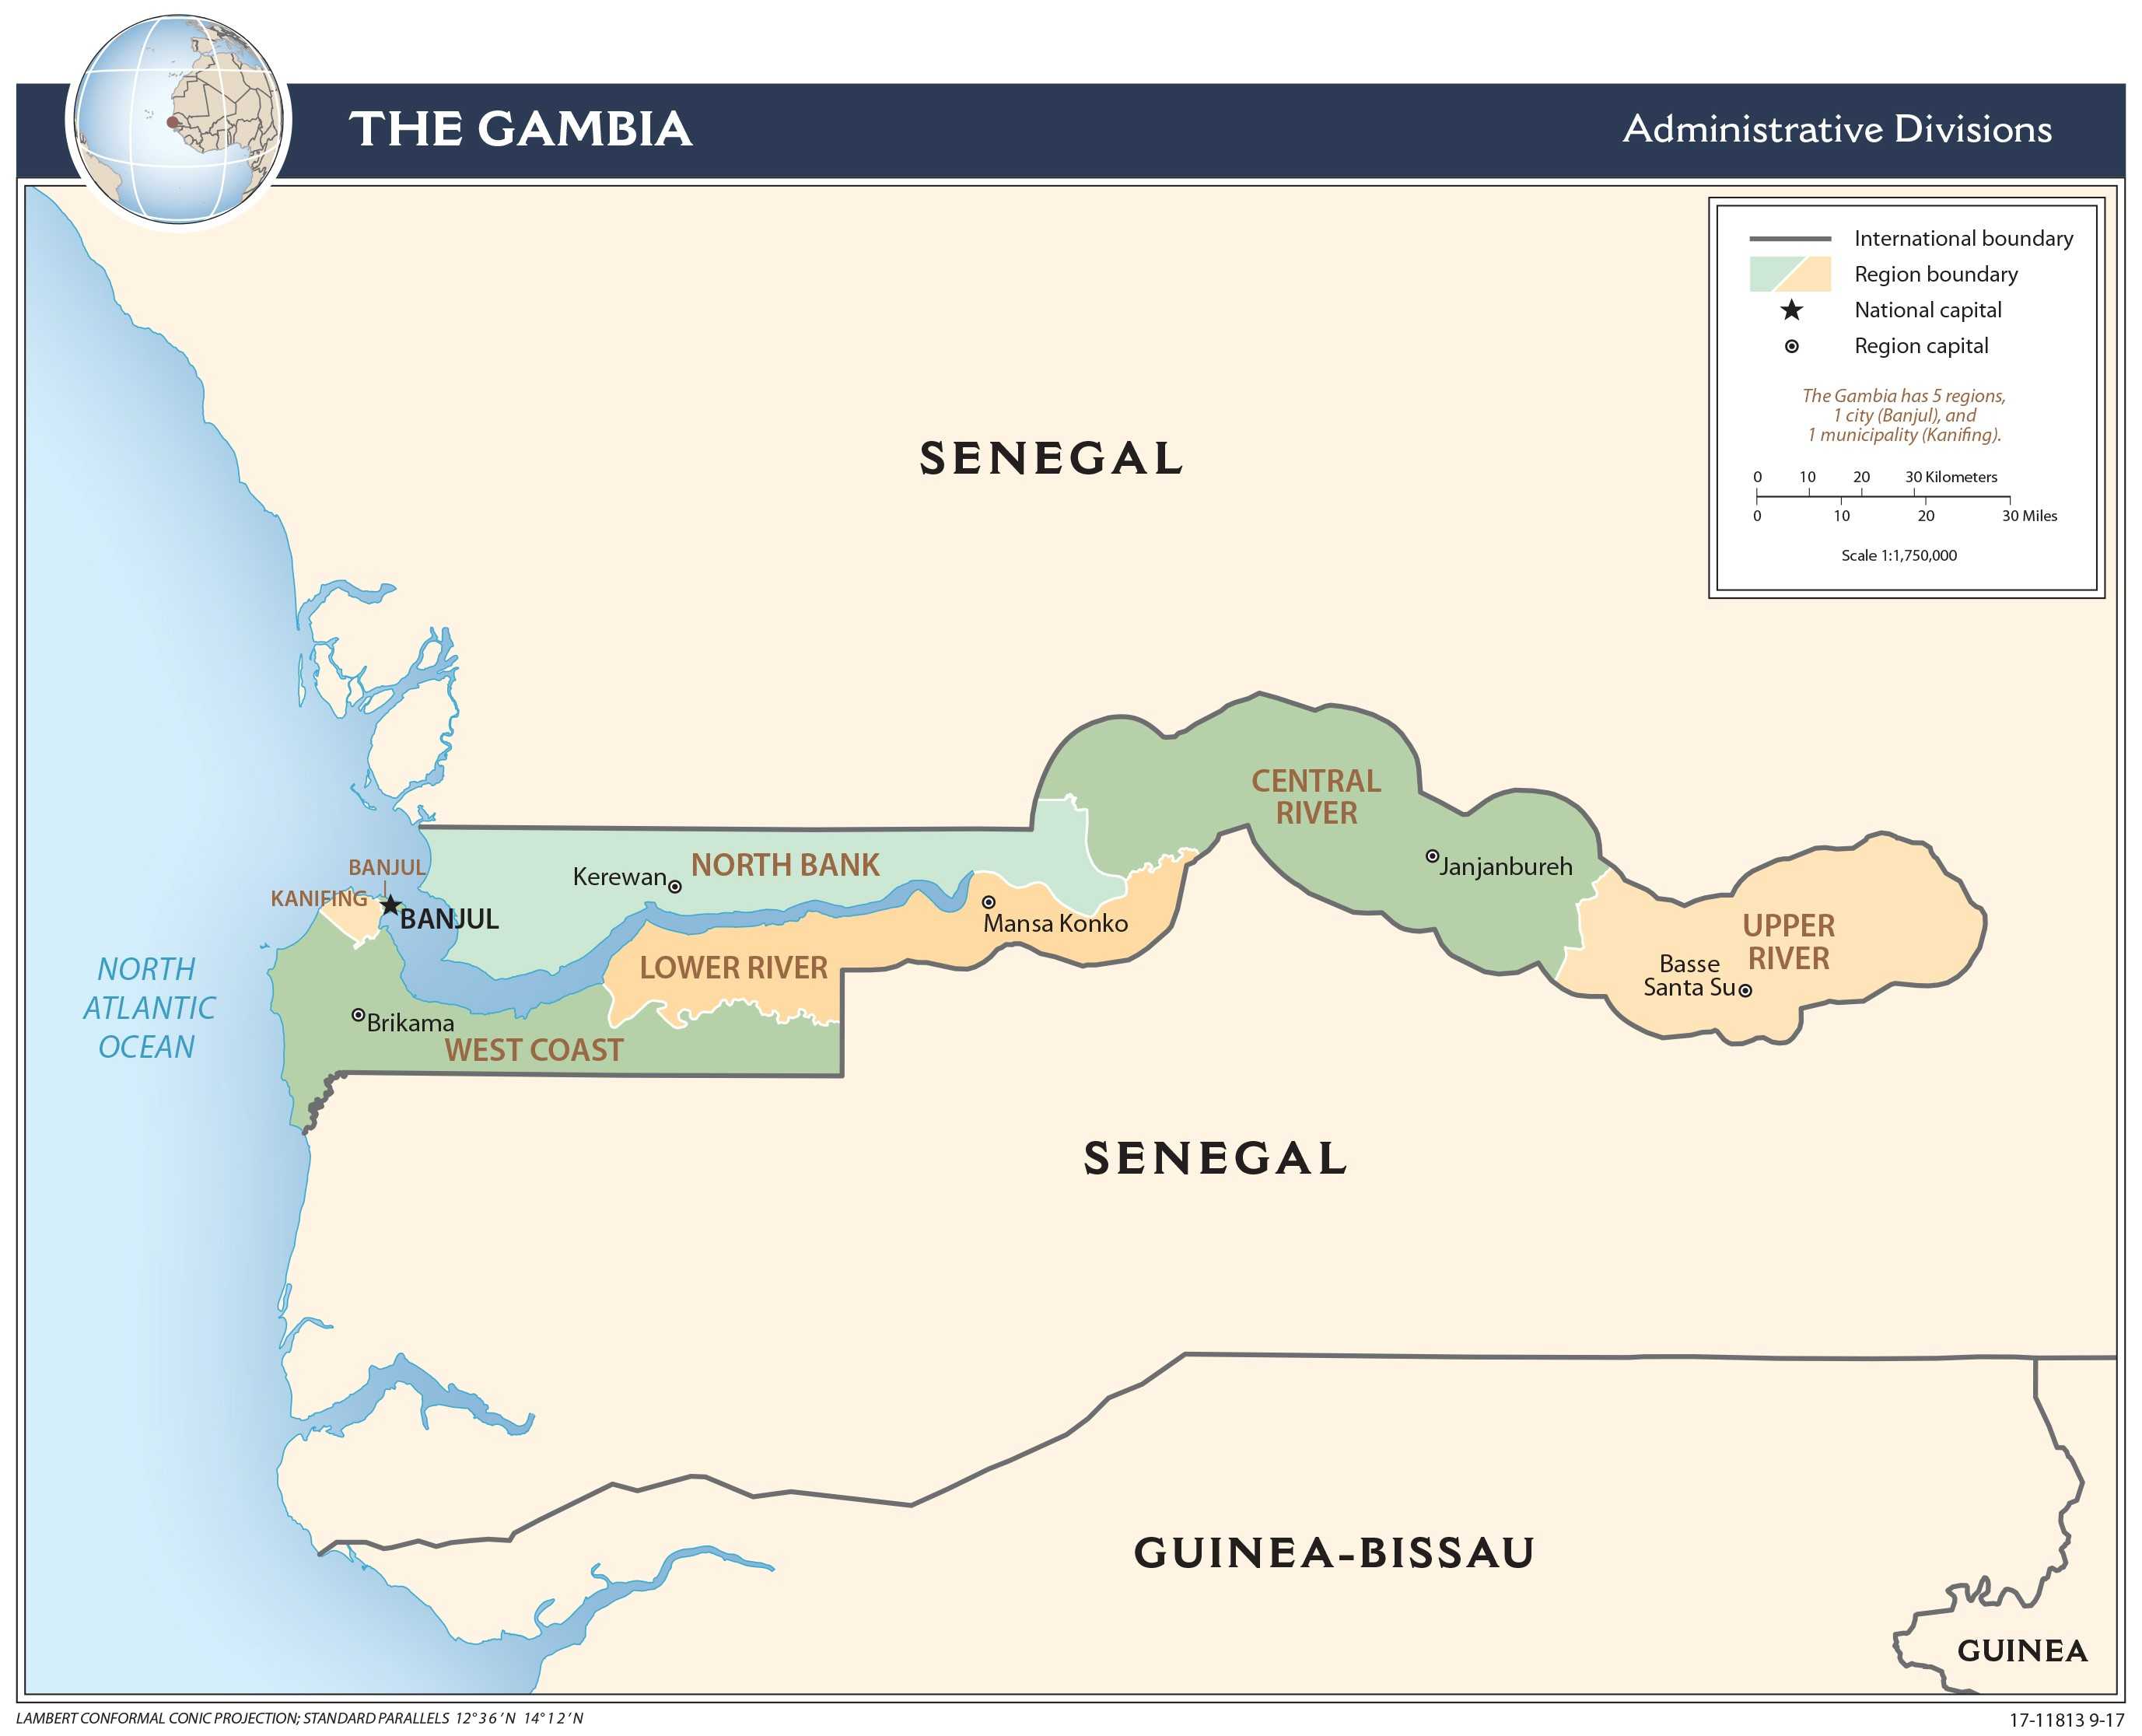 Administrative map of Gambia.